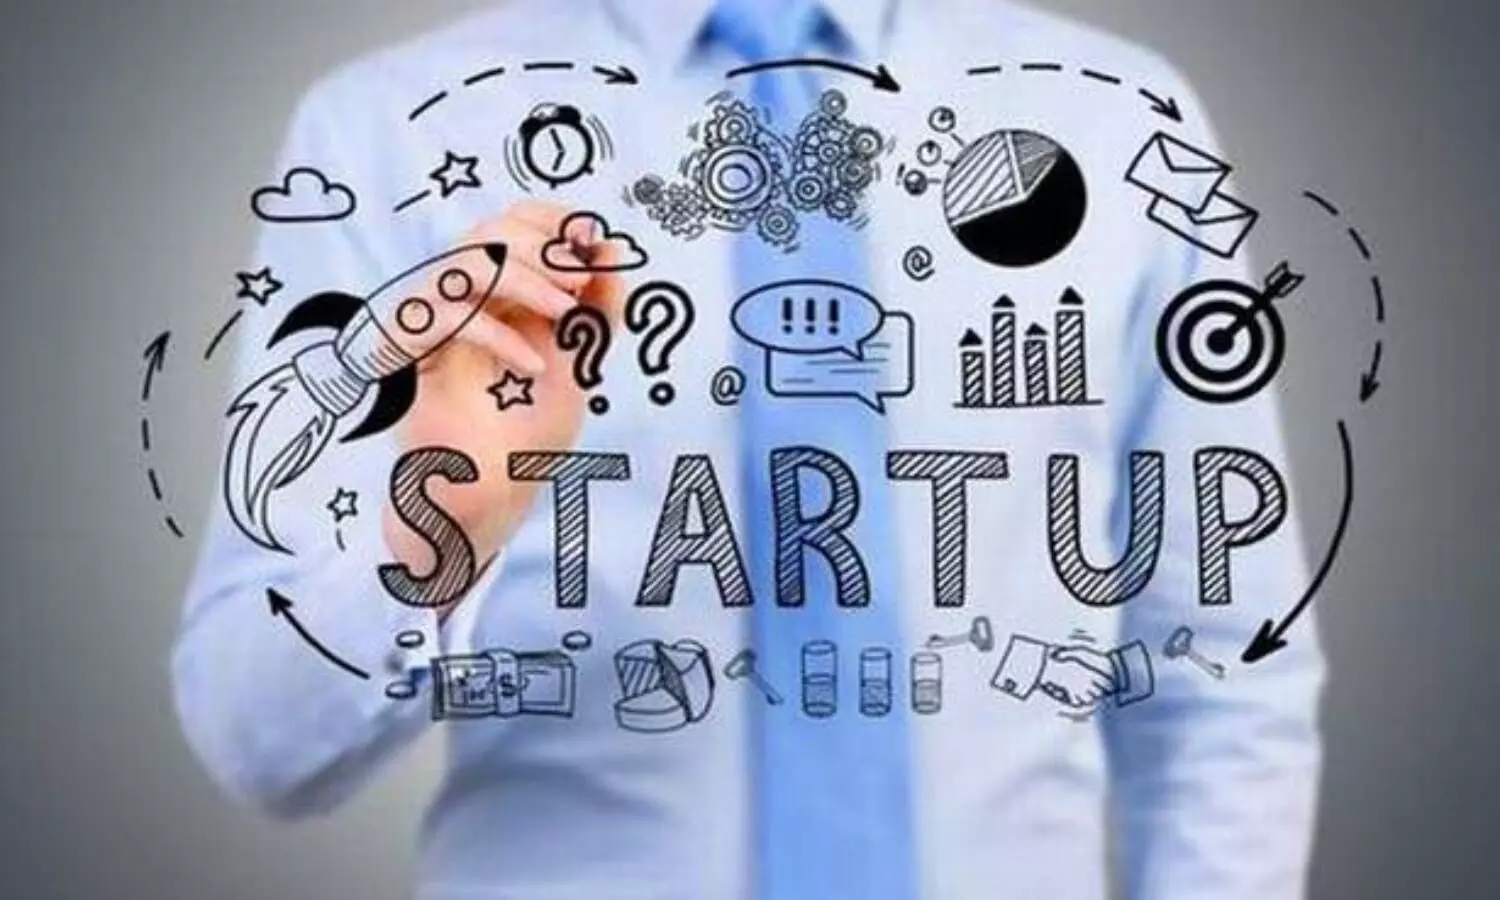 Telangana AI Mission launches Investor Connect for startups